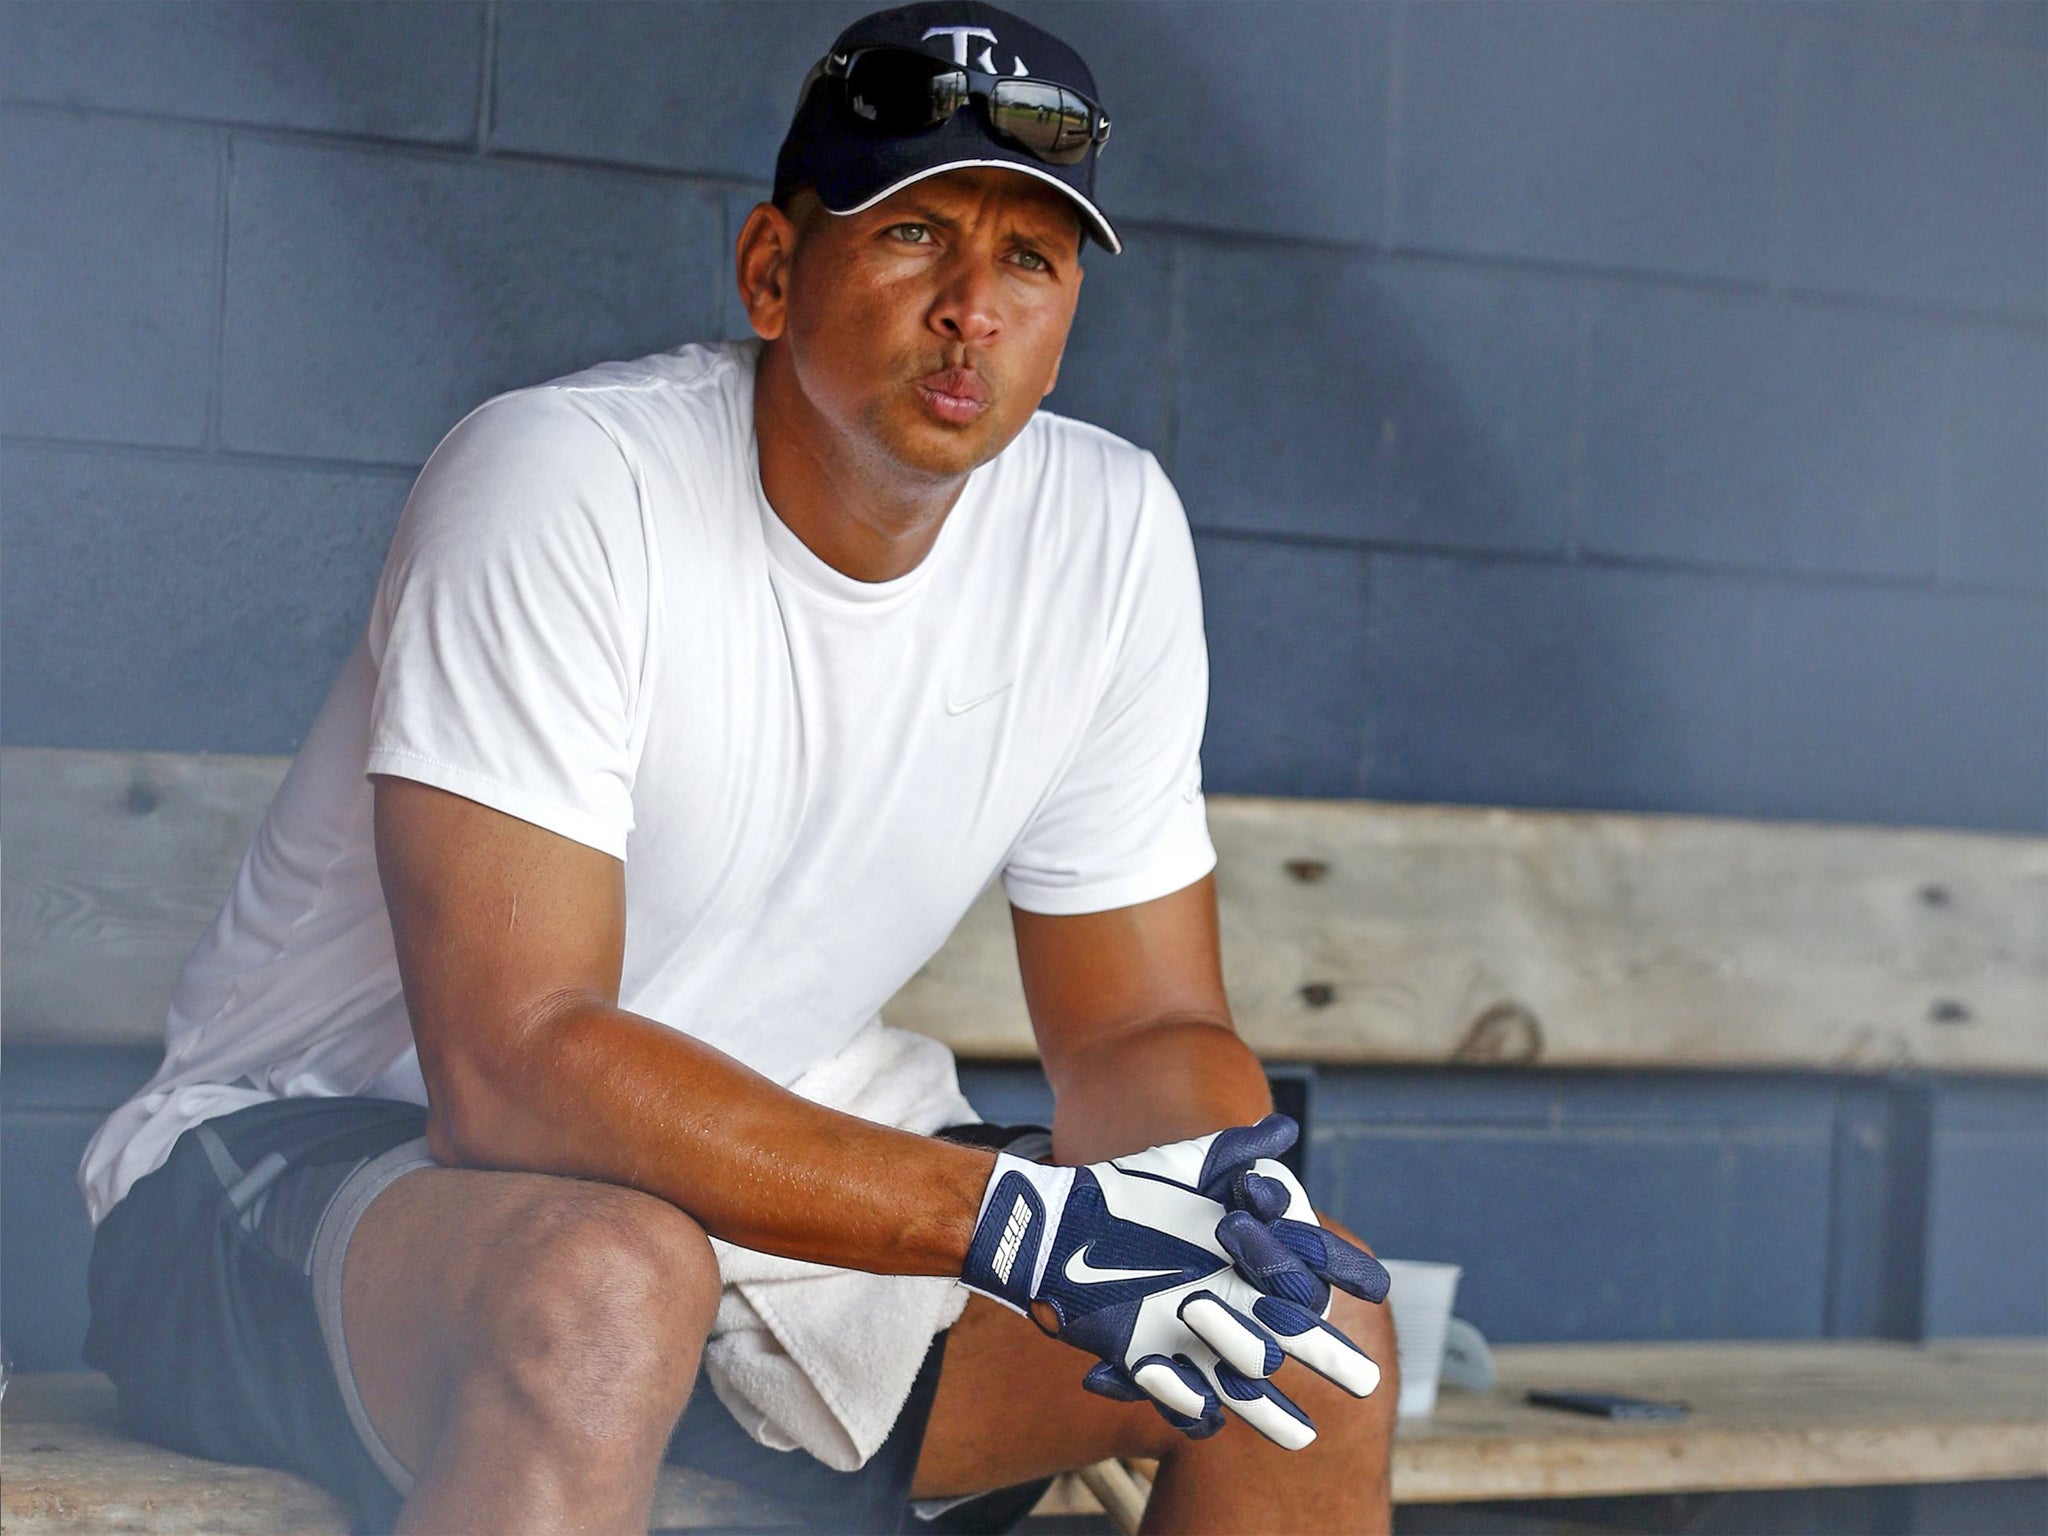 Alex Rodriguez is said to be involved in the latest drug scandal rocking baseball